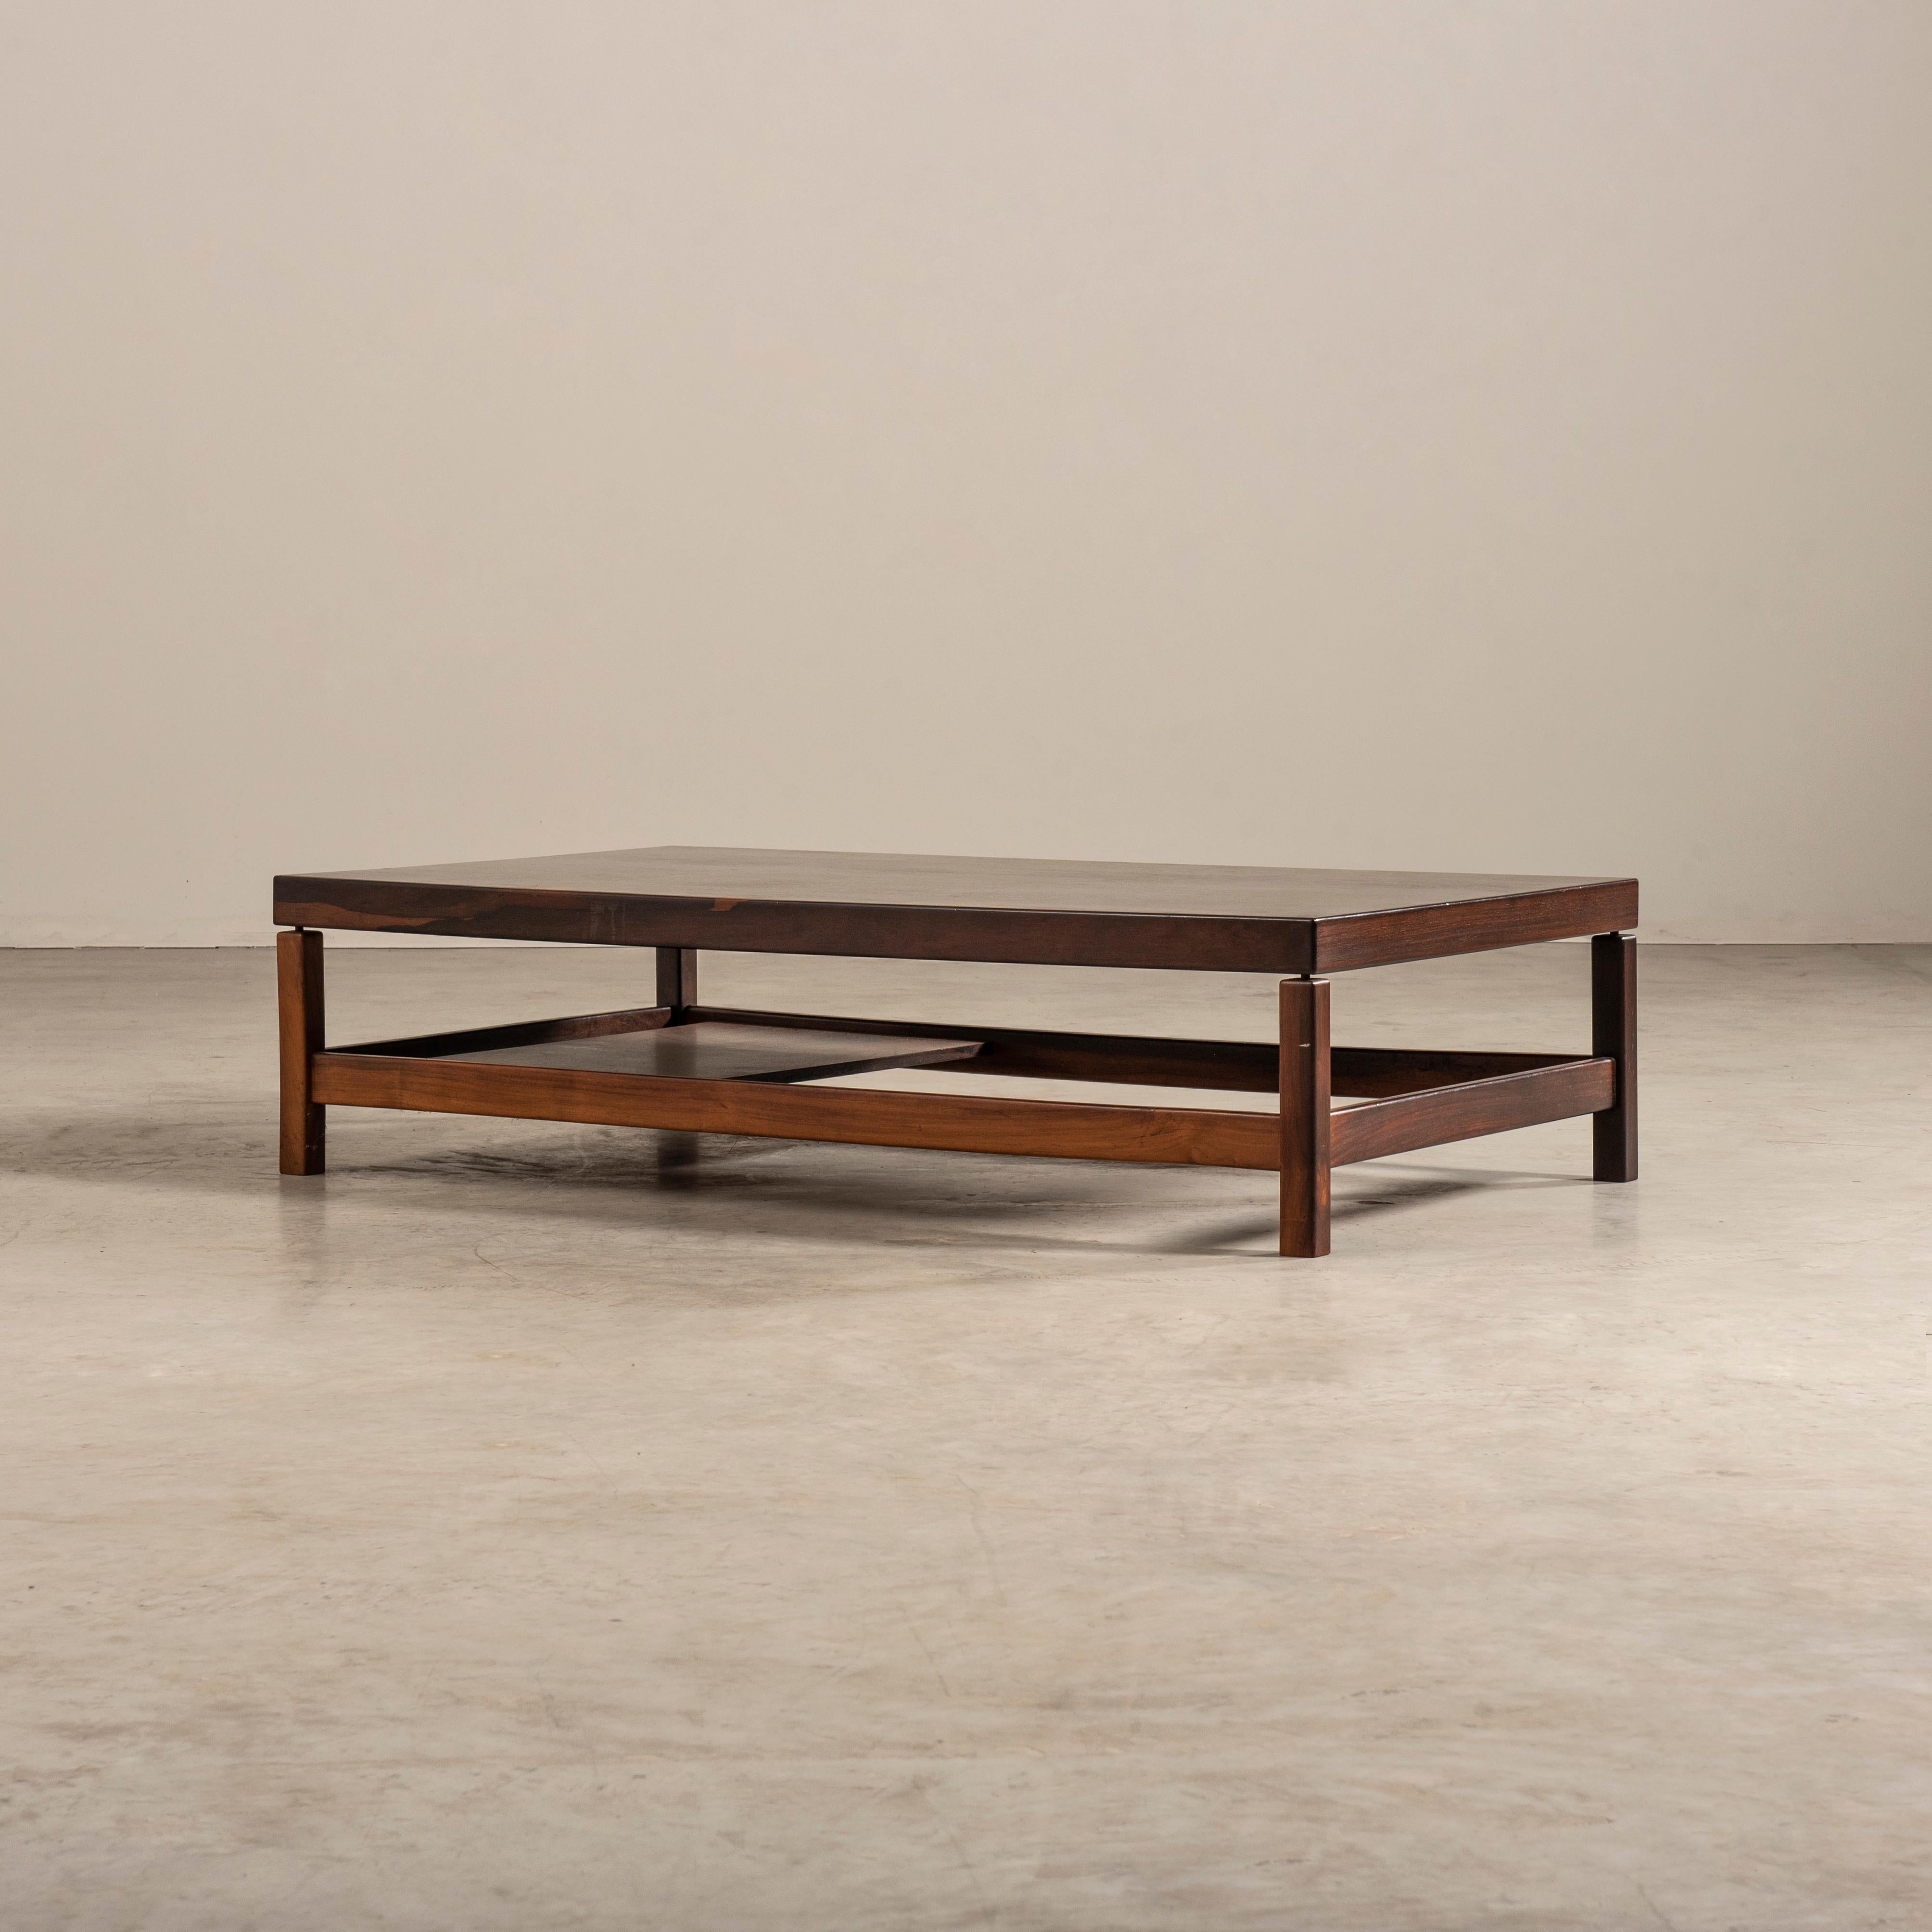 This coffee table presents a timeless design reminiscent of the renowned Brazilian designer Sergio Rodrigues. Crafted in Brazil during the 1960s, this piece exudes the spirit of that era, capturing the essence of mid-century modern aesthetics.

With